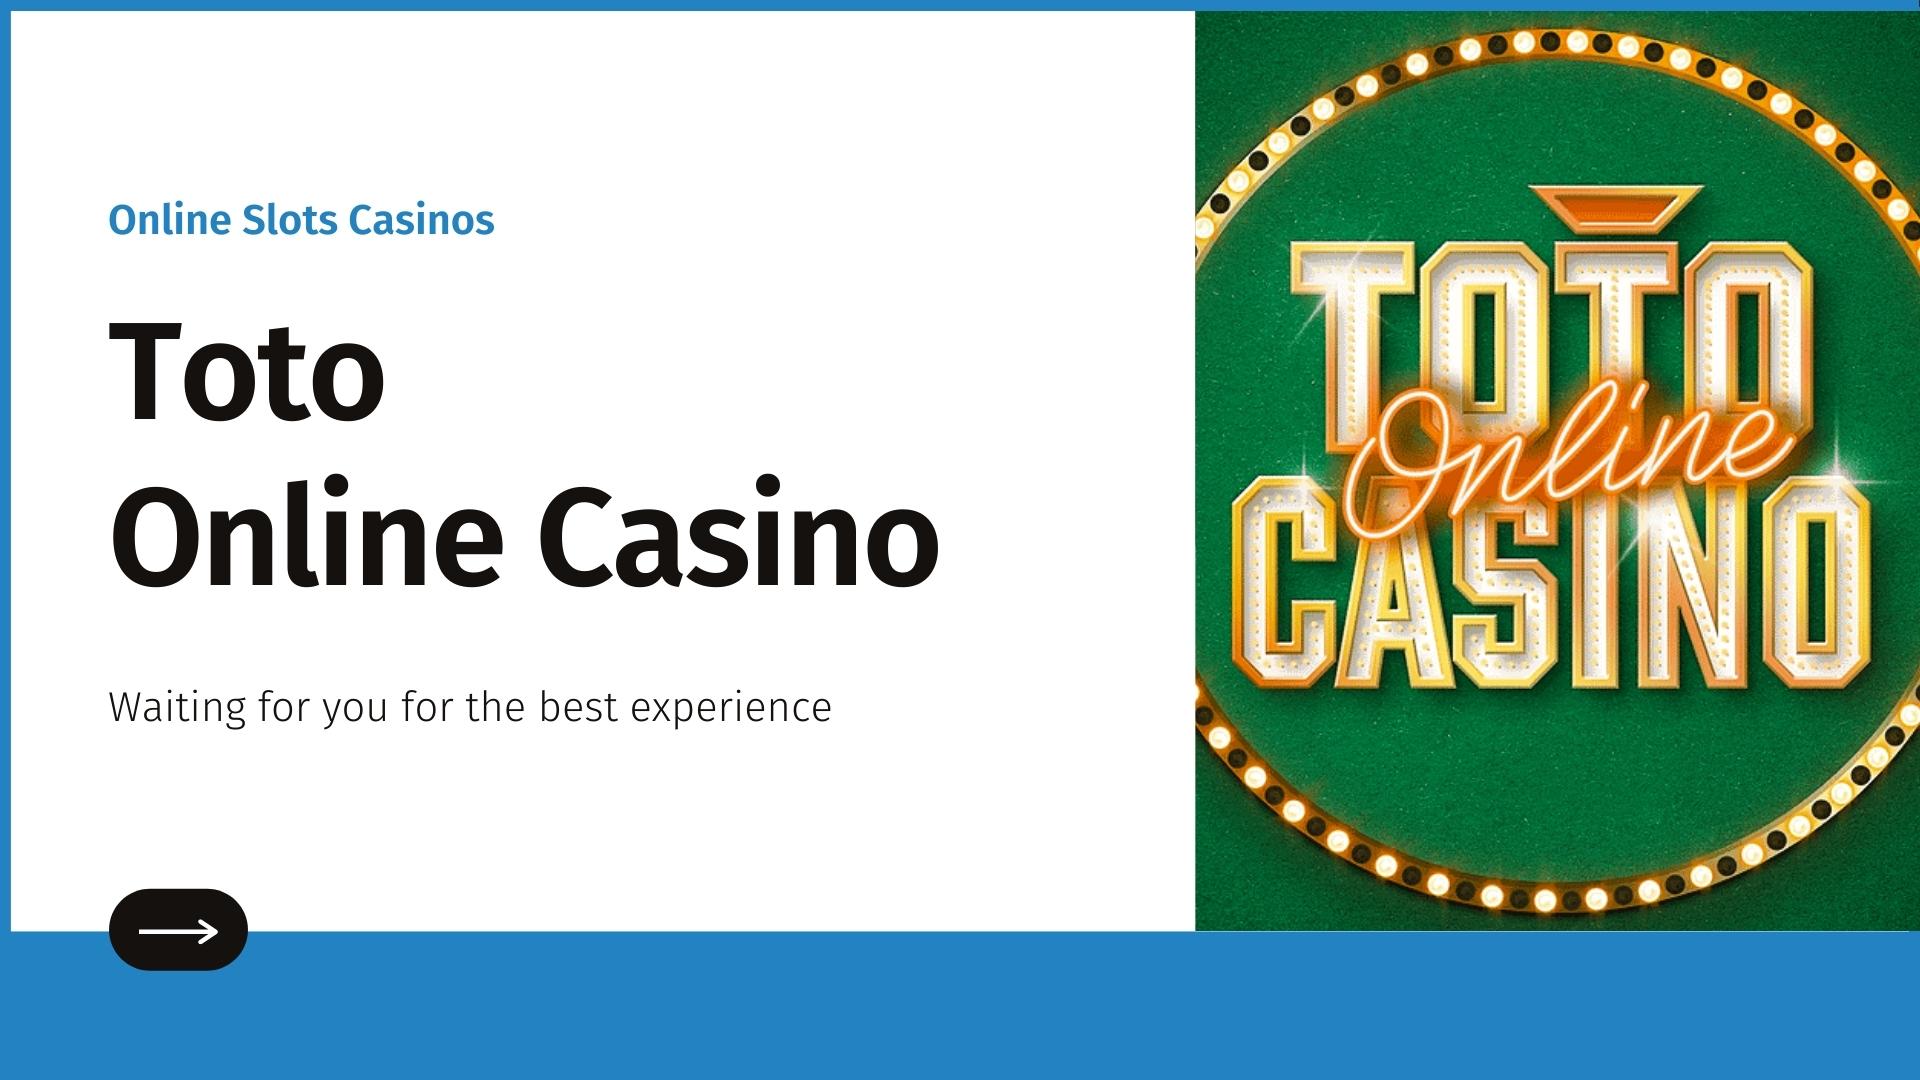 Toto casino is waiting for you for the best experience